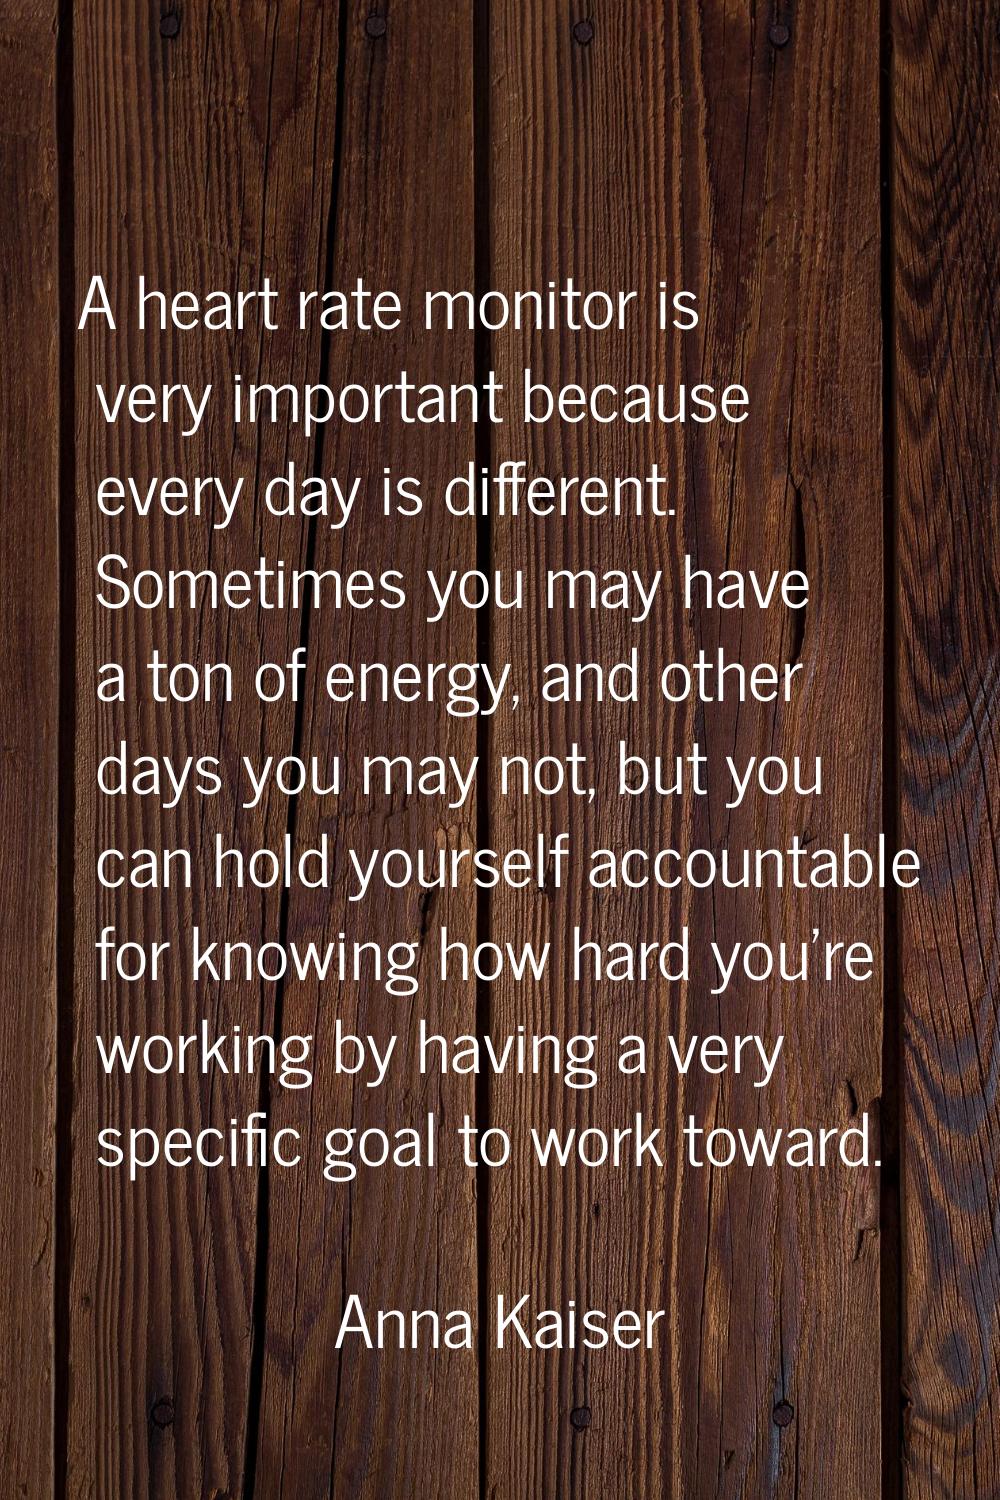 A heart rate monitor is very important because every day is different. Sometimes you may have a ton